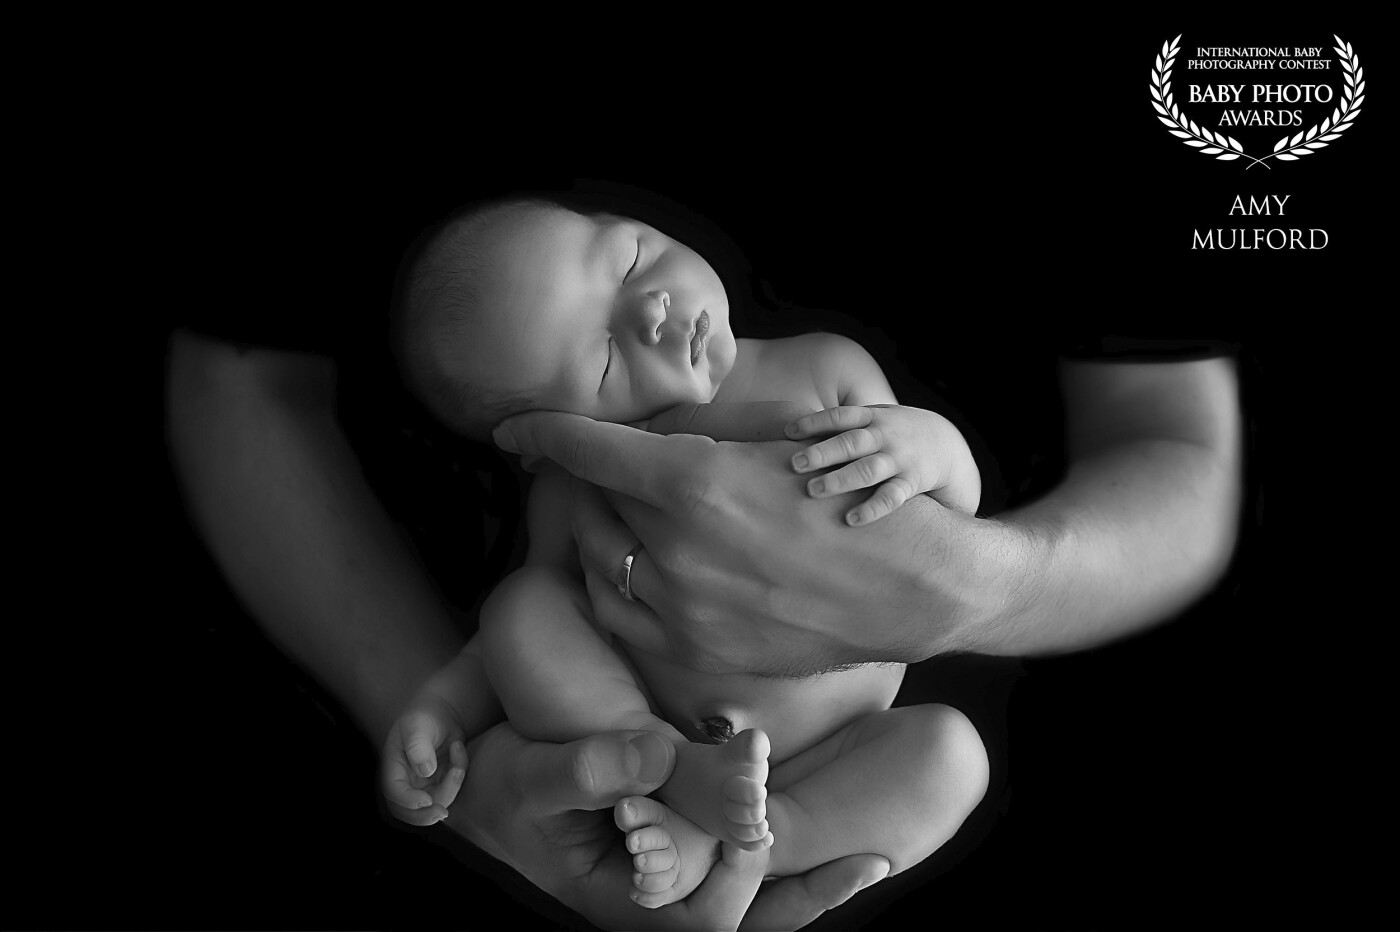 Anytime I have a nice sleepy baby, I will put them in dads hands so that I can get this gorgeous moody, black and white image. Moms always gush over them!